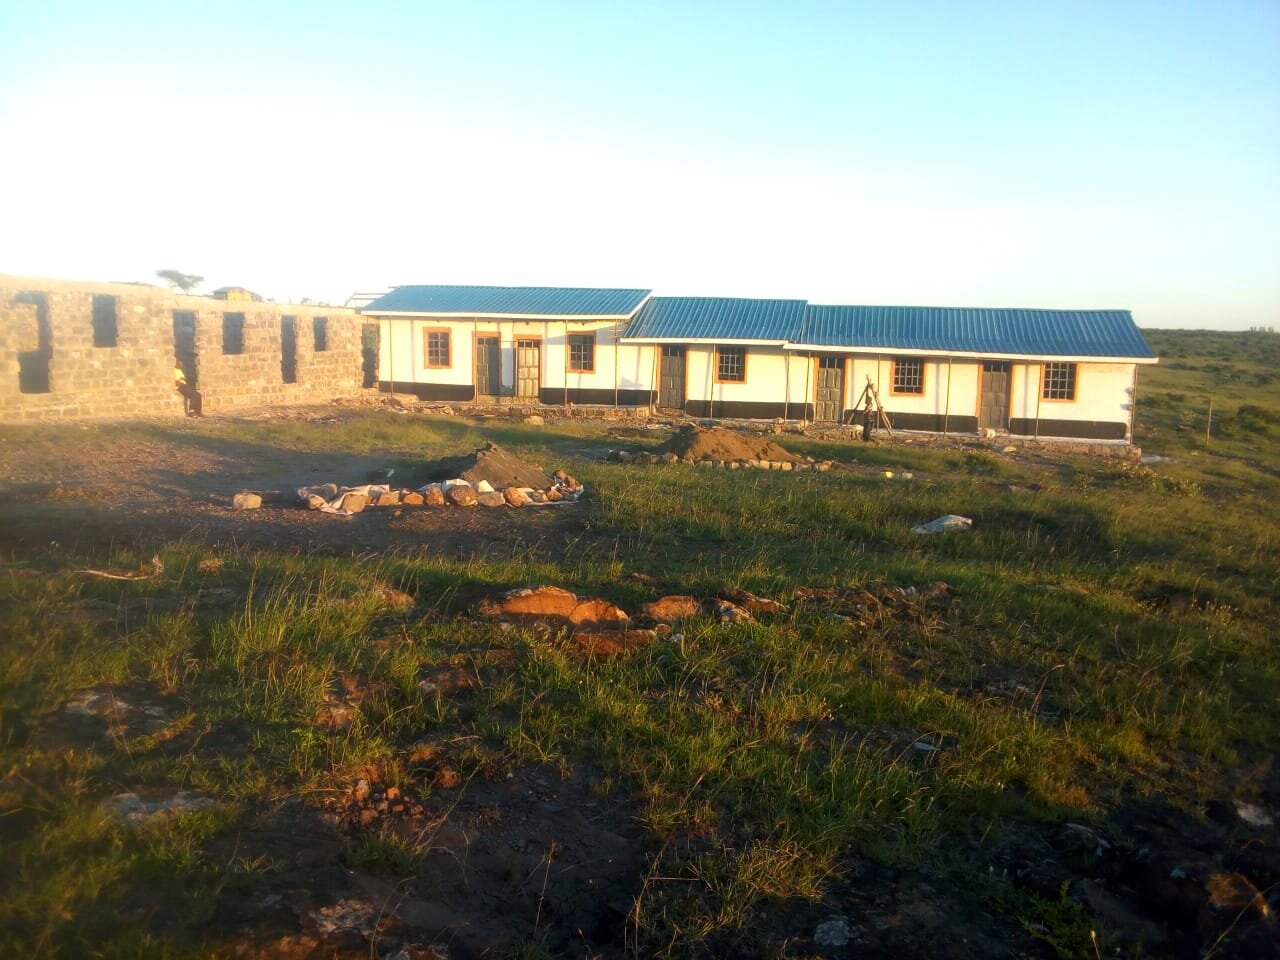 View of the Damside classroom block